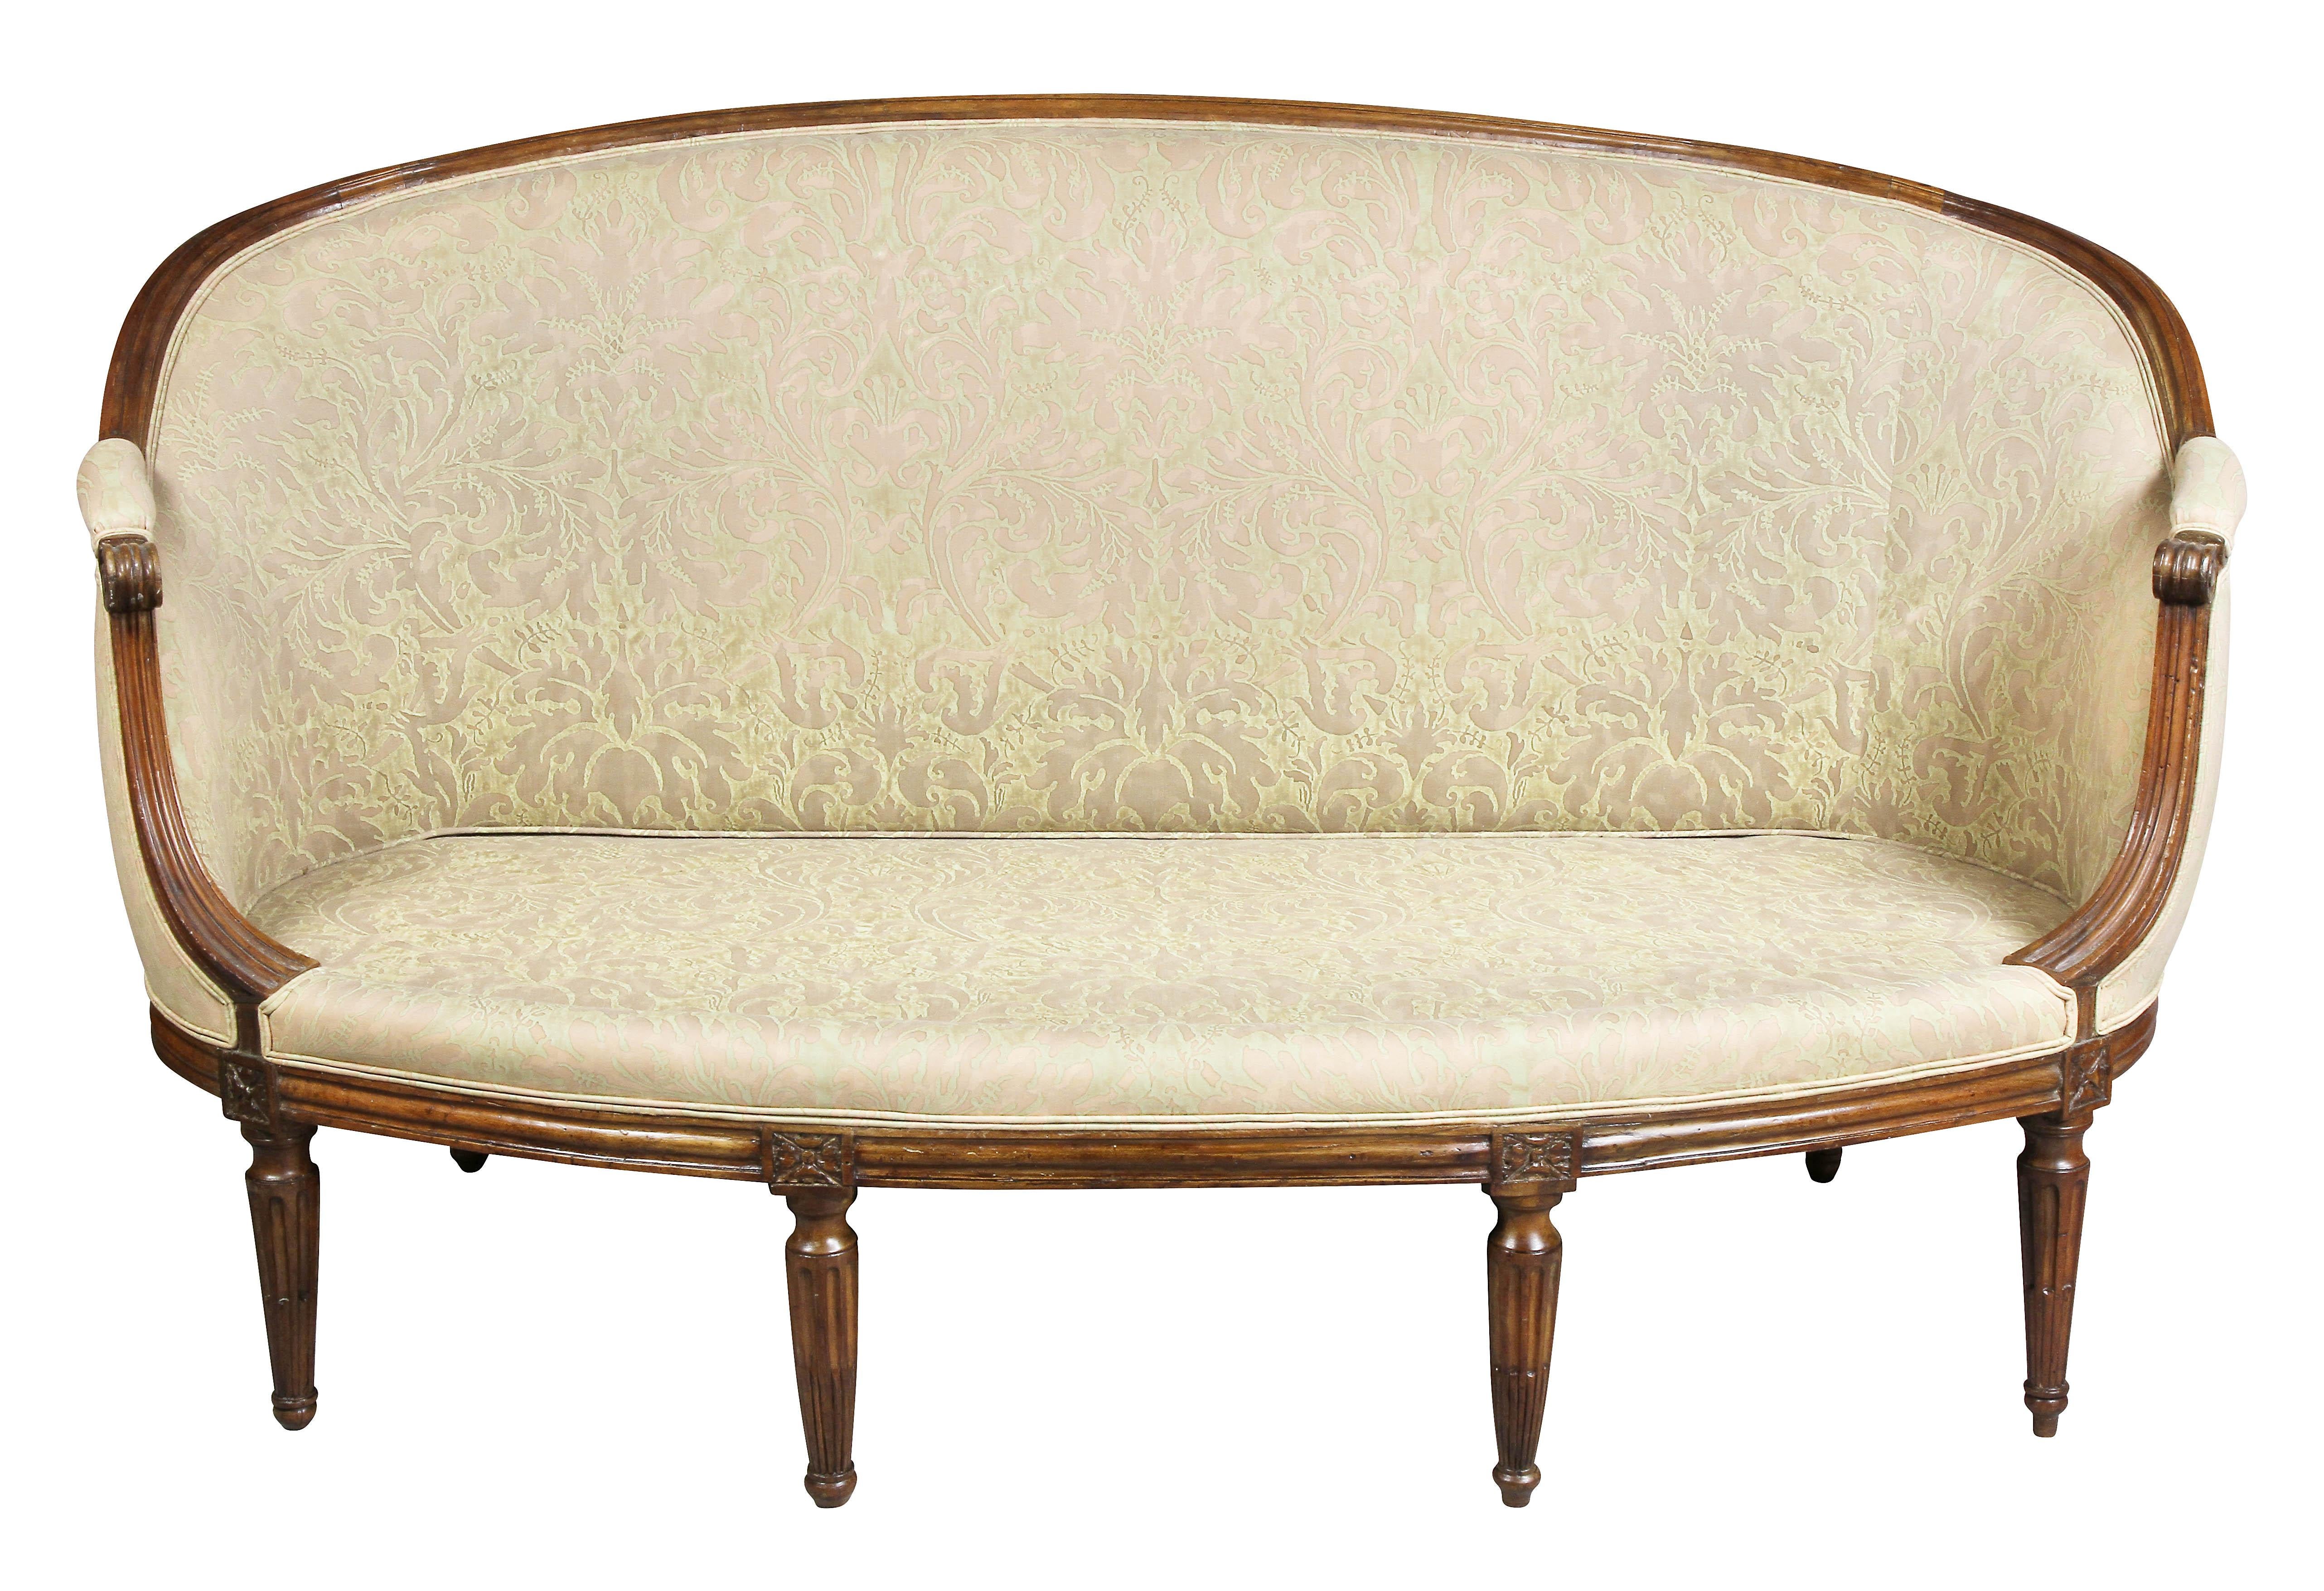 Late 18th Century Louis XVI Walnut Fortuny Upholstered Settee